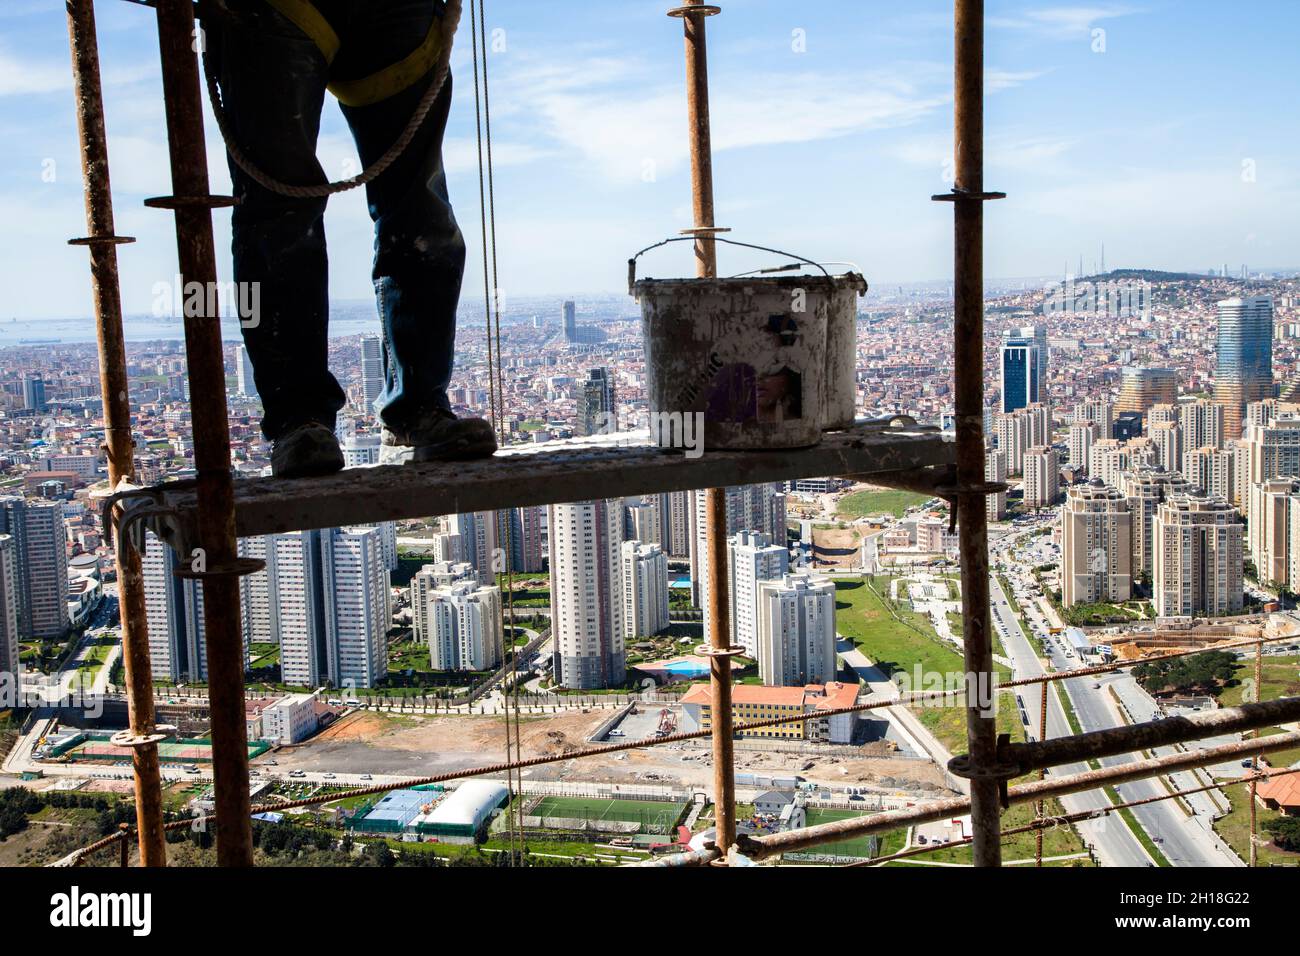 Istanbul,Turkey - 04-02-2013:Seat belt not fastened when construction worker is working in an elevated place Stock Photo